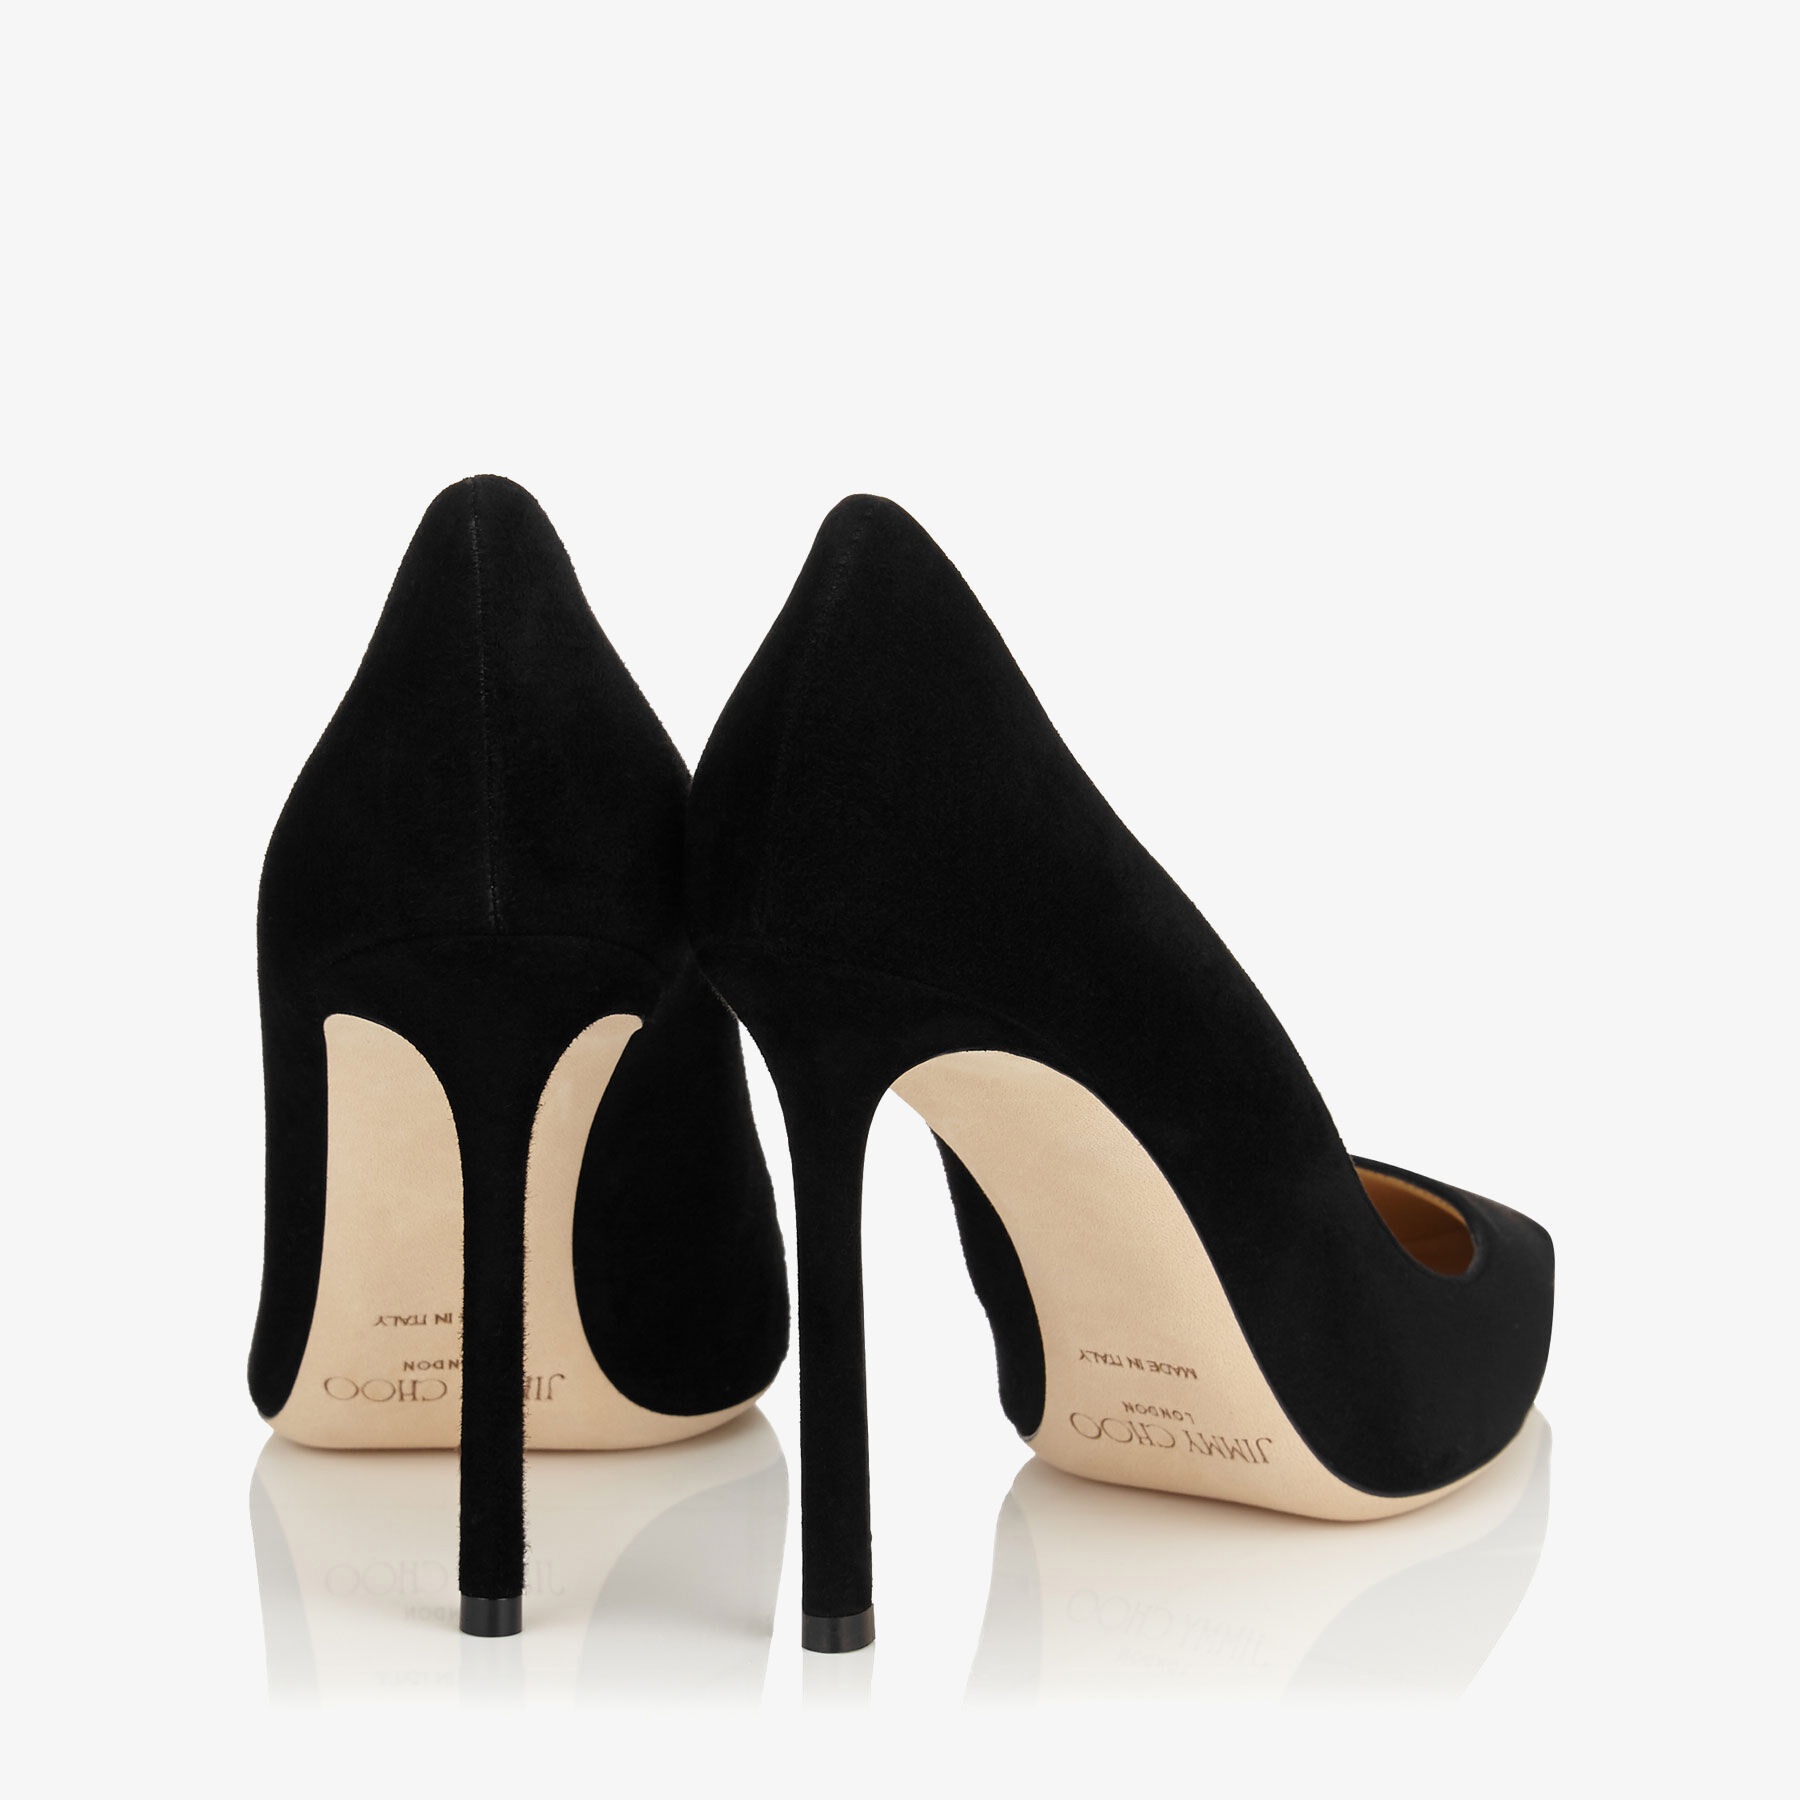 Romy 100
Black Suede Pointy Toe Pumps - 5